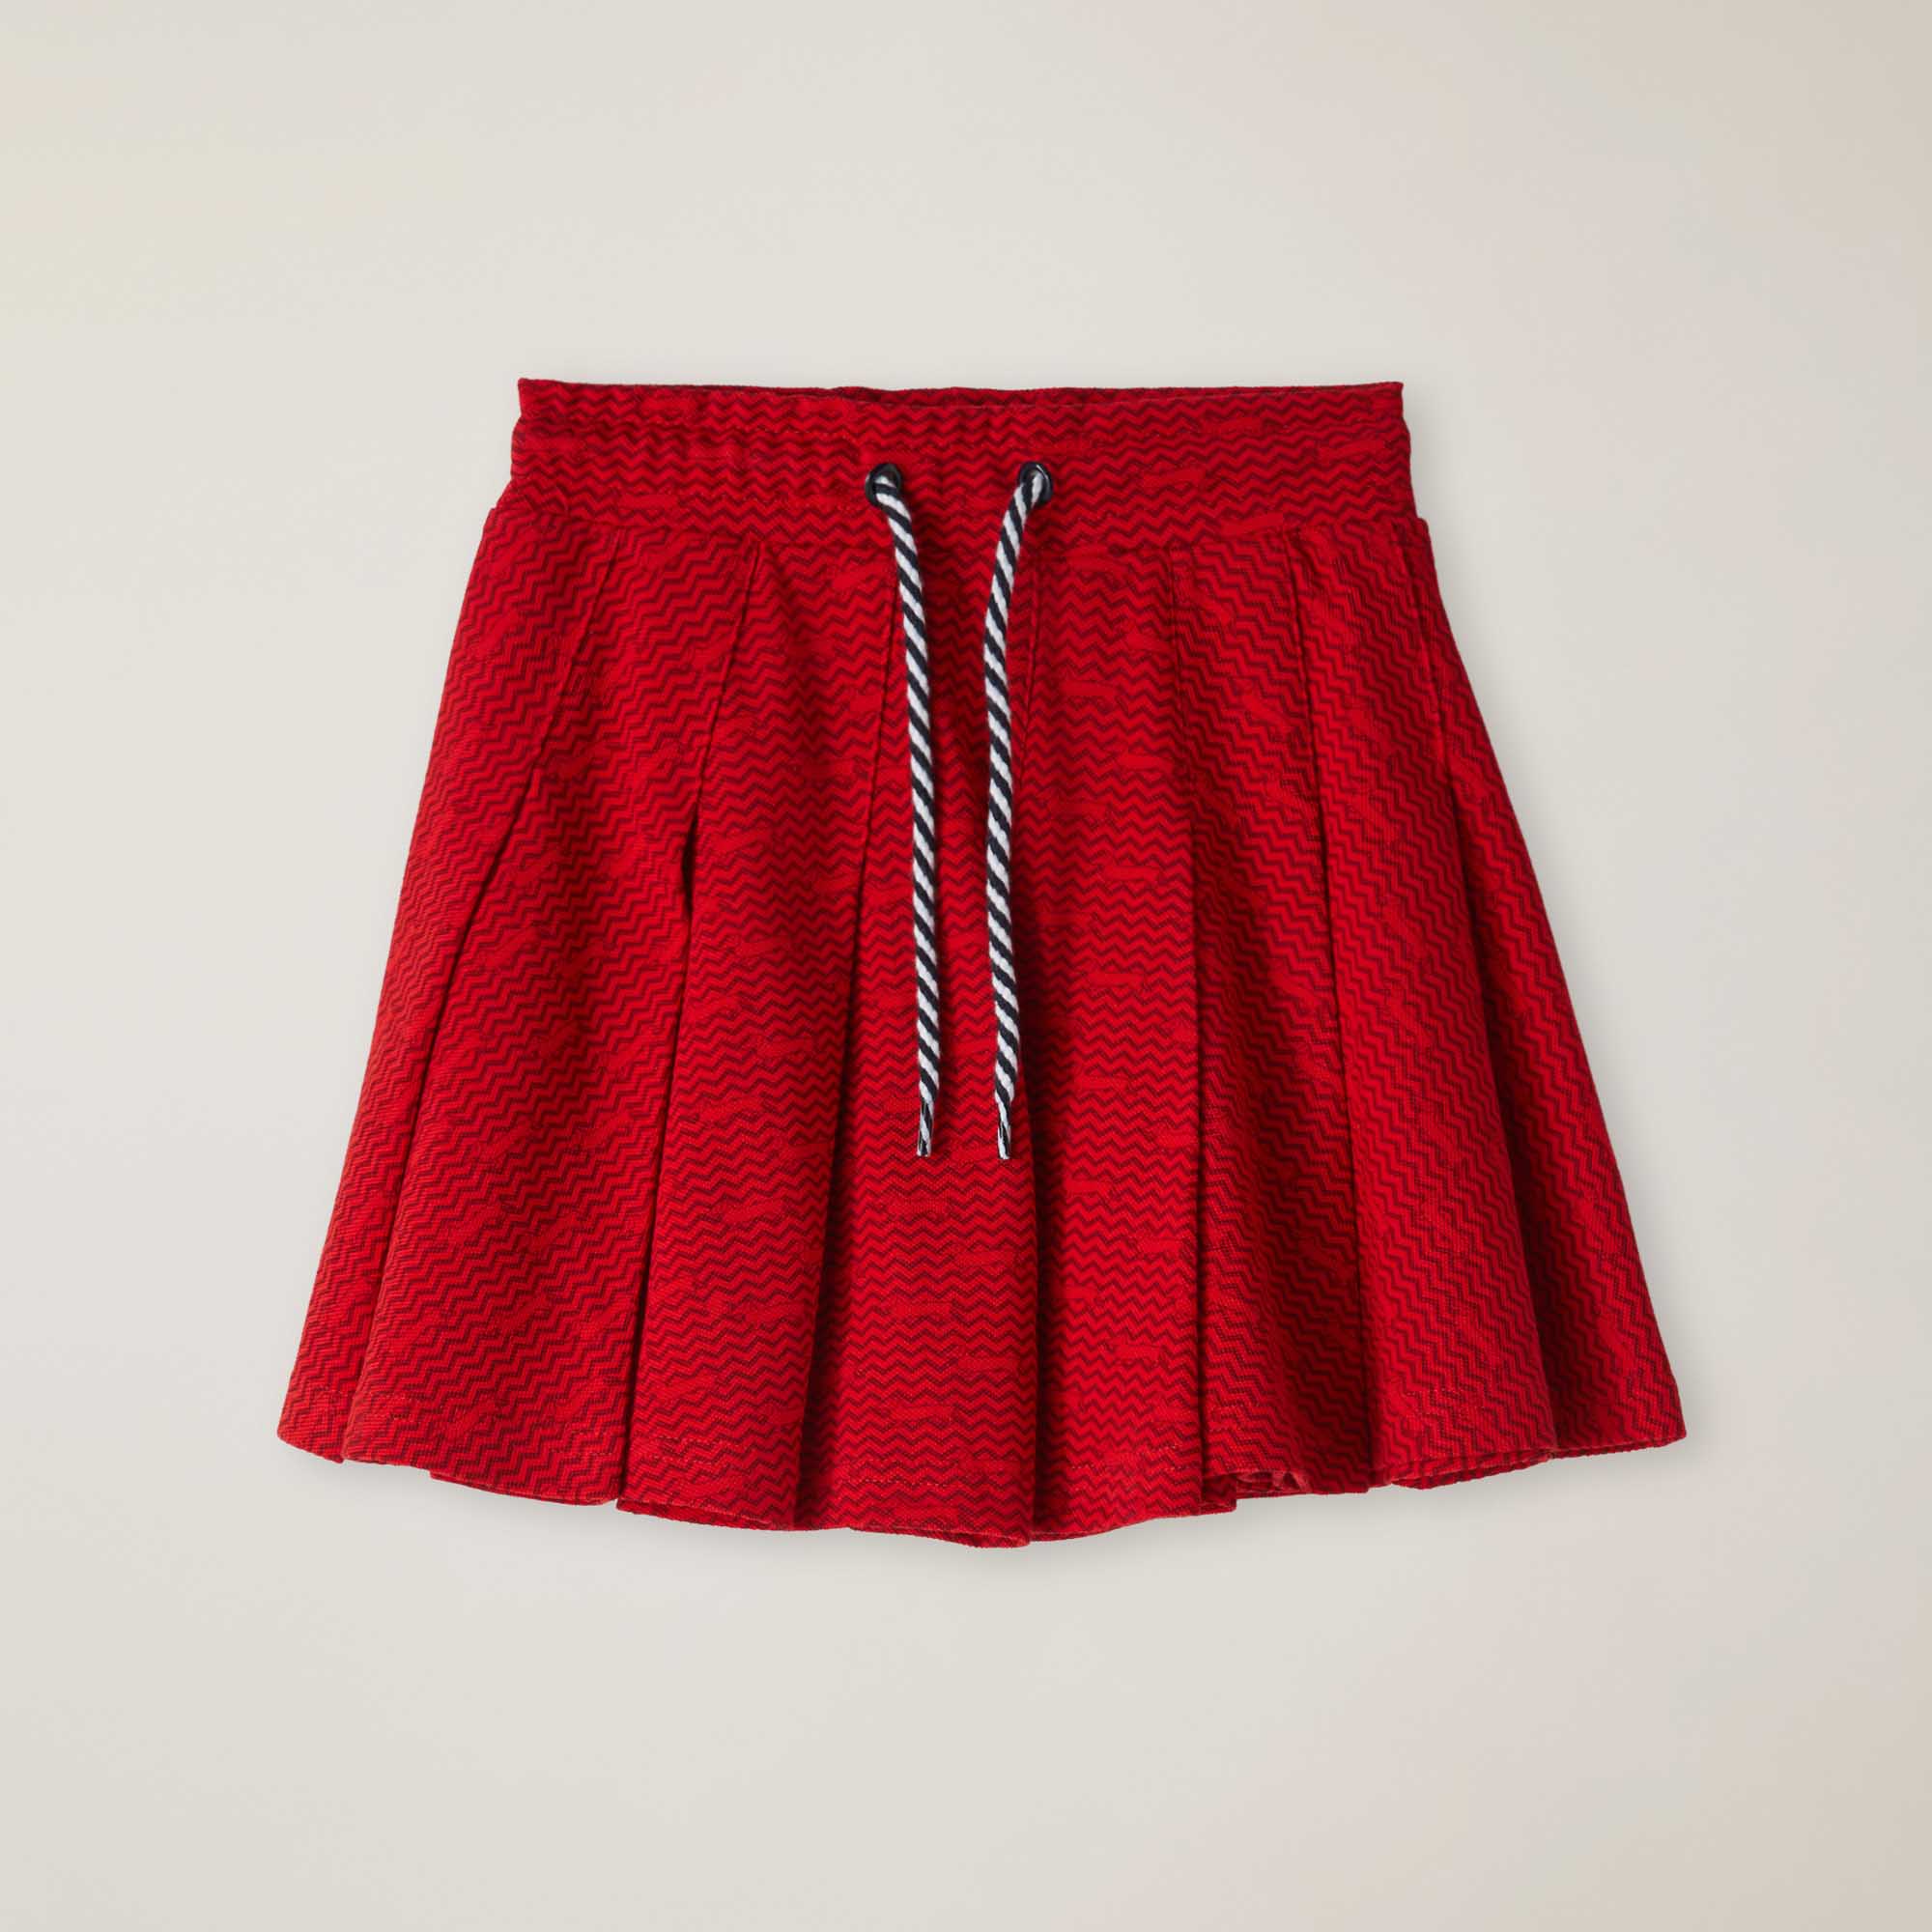 Micro-patterned print skirt, Red, large image number 0